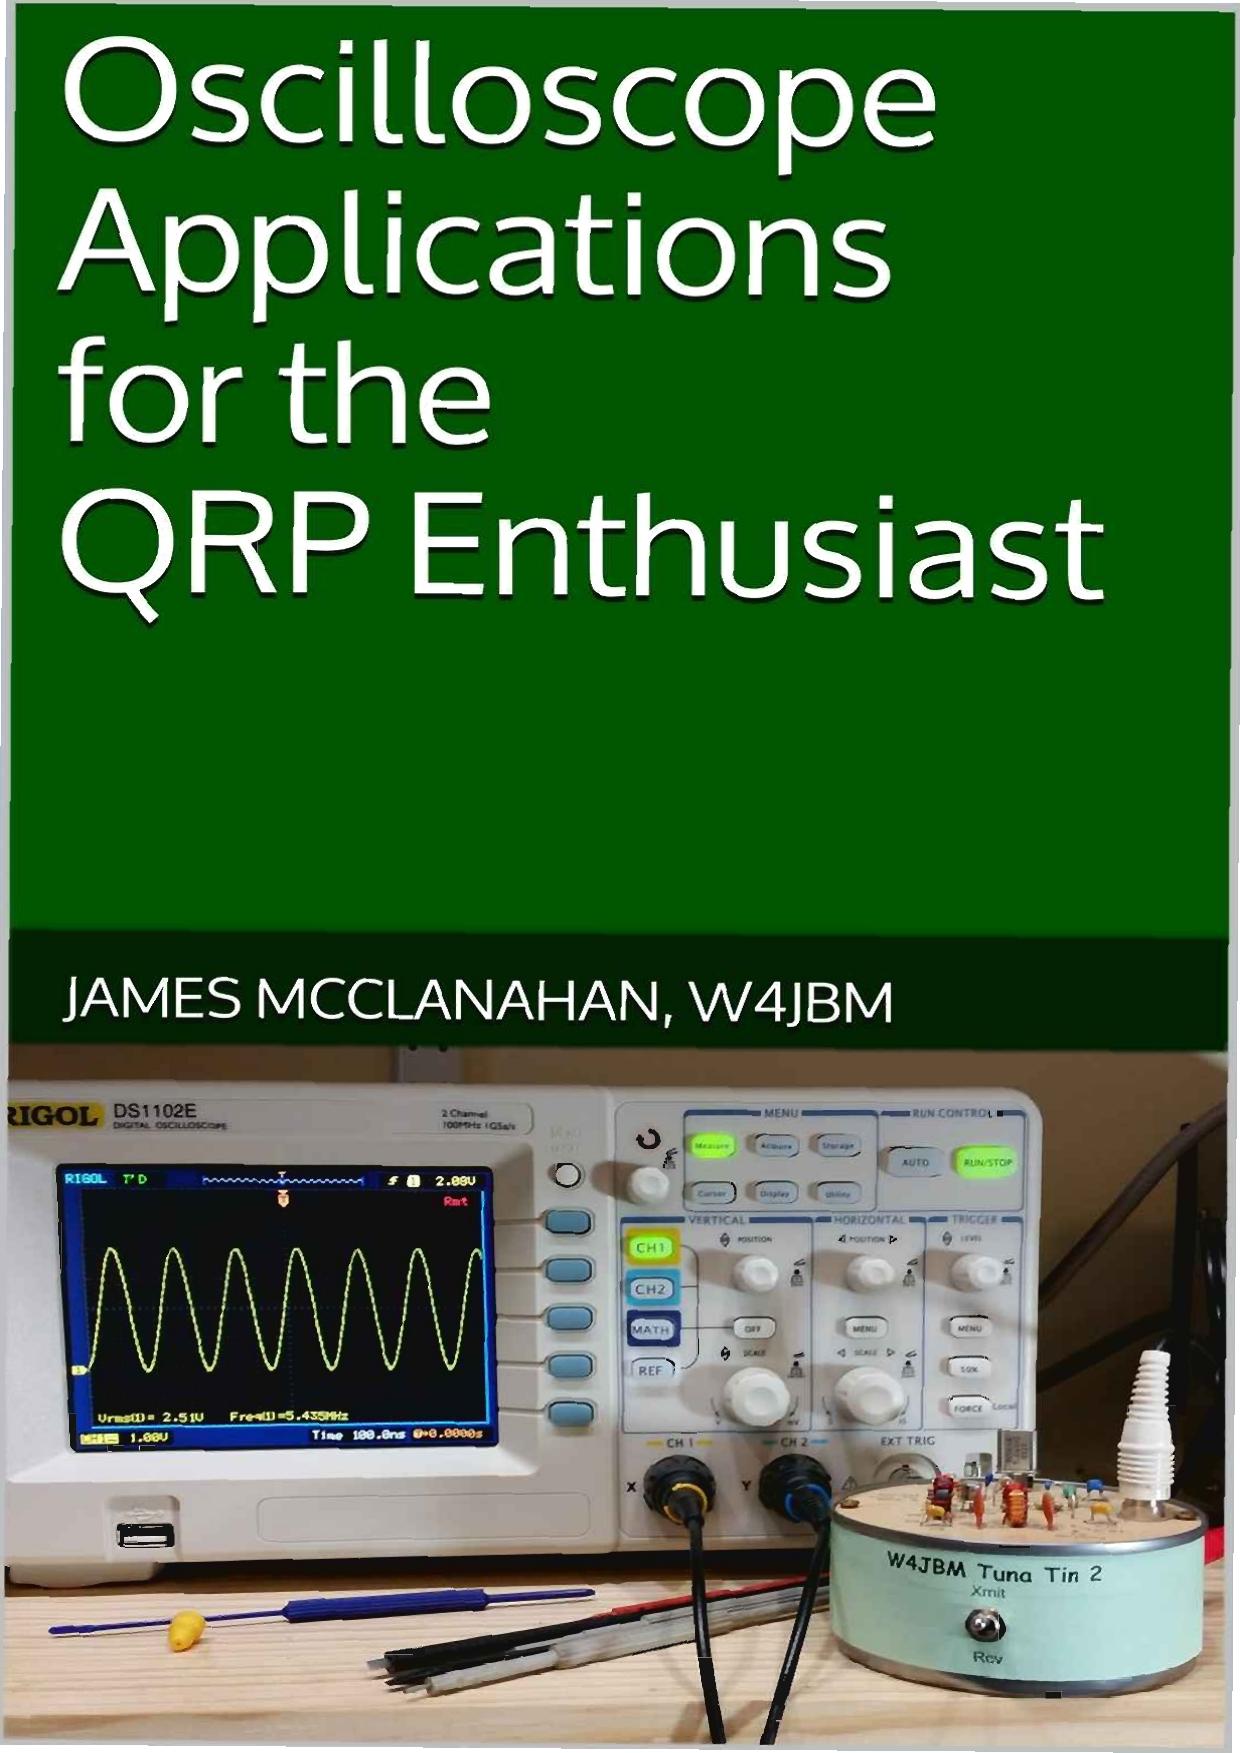 Oscilloscope Applications for the QRP Enthusiast by James McClanahan